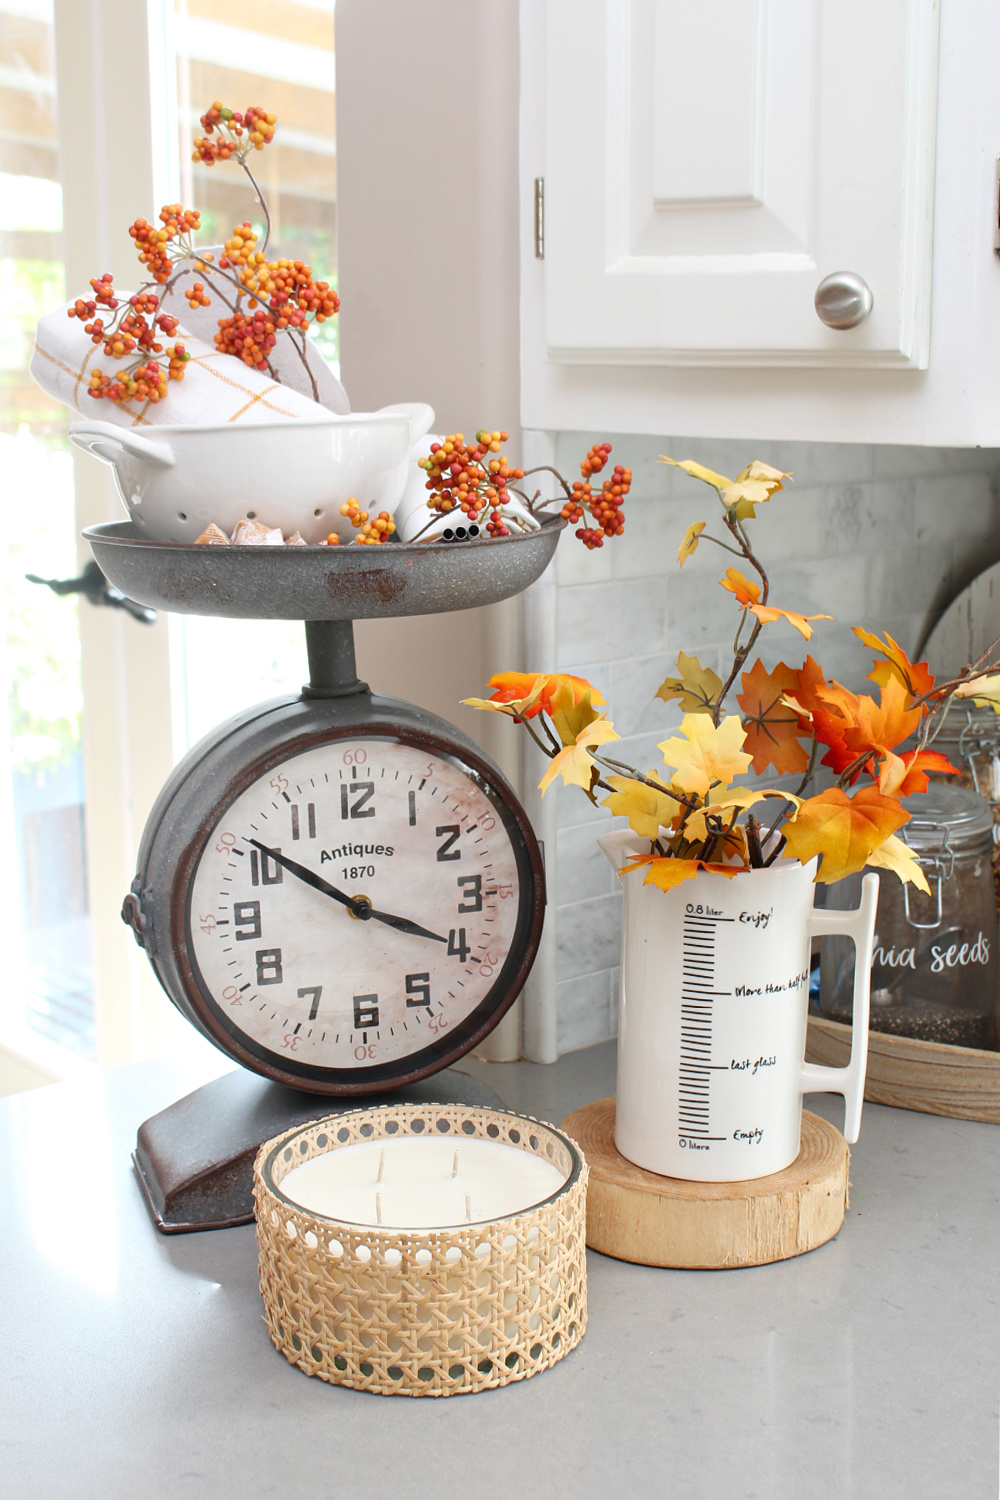 Kitchen scale clock decorated for fall with traditional fall colors.